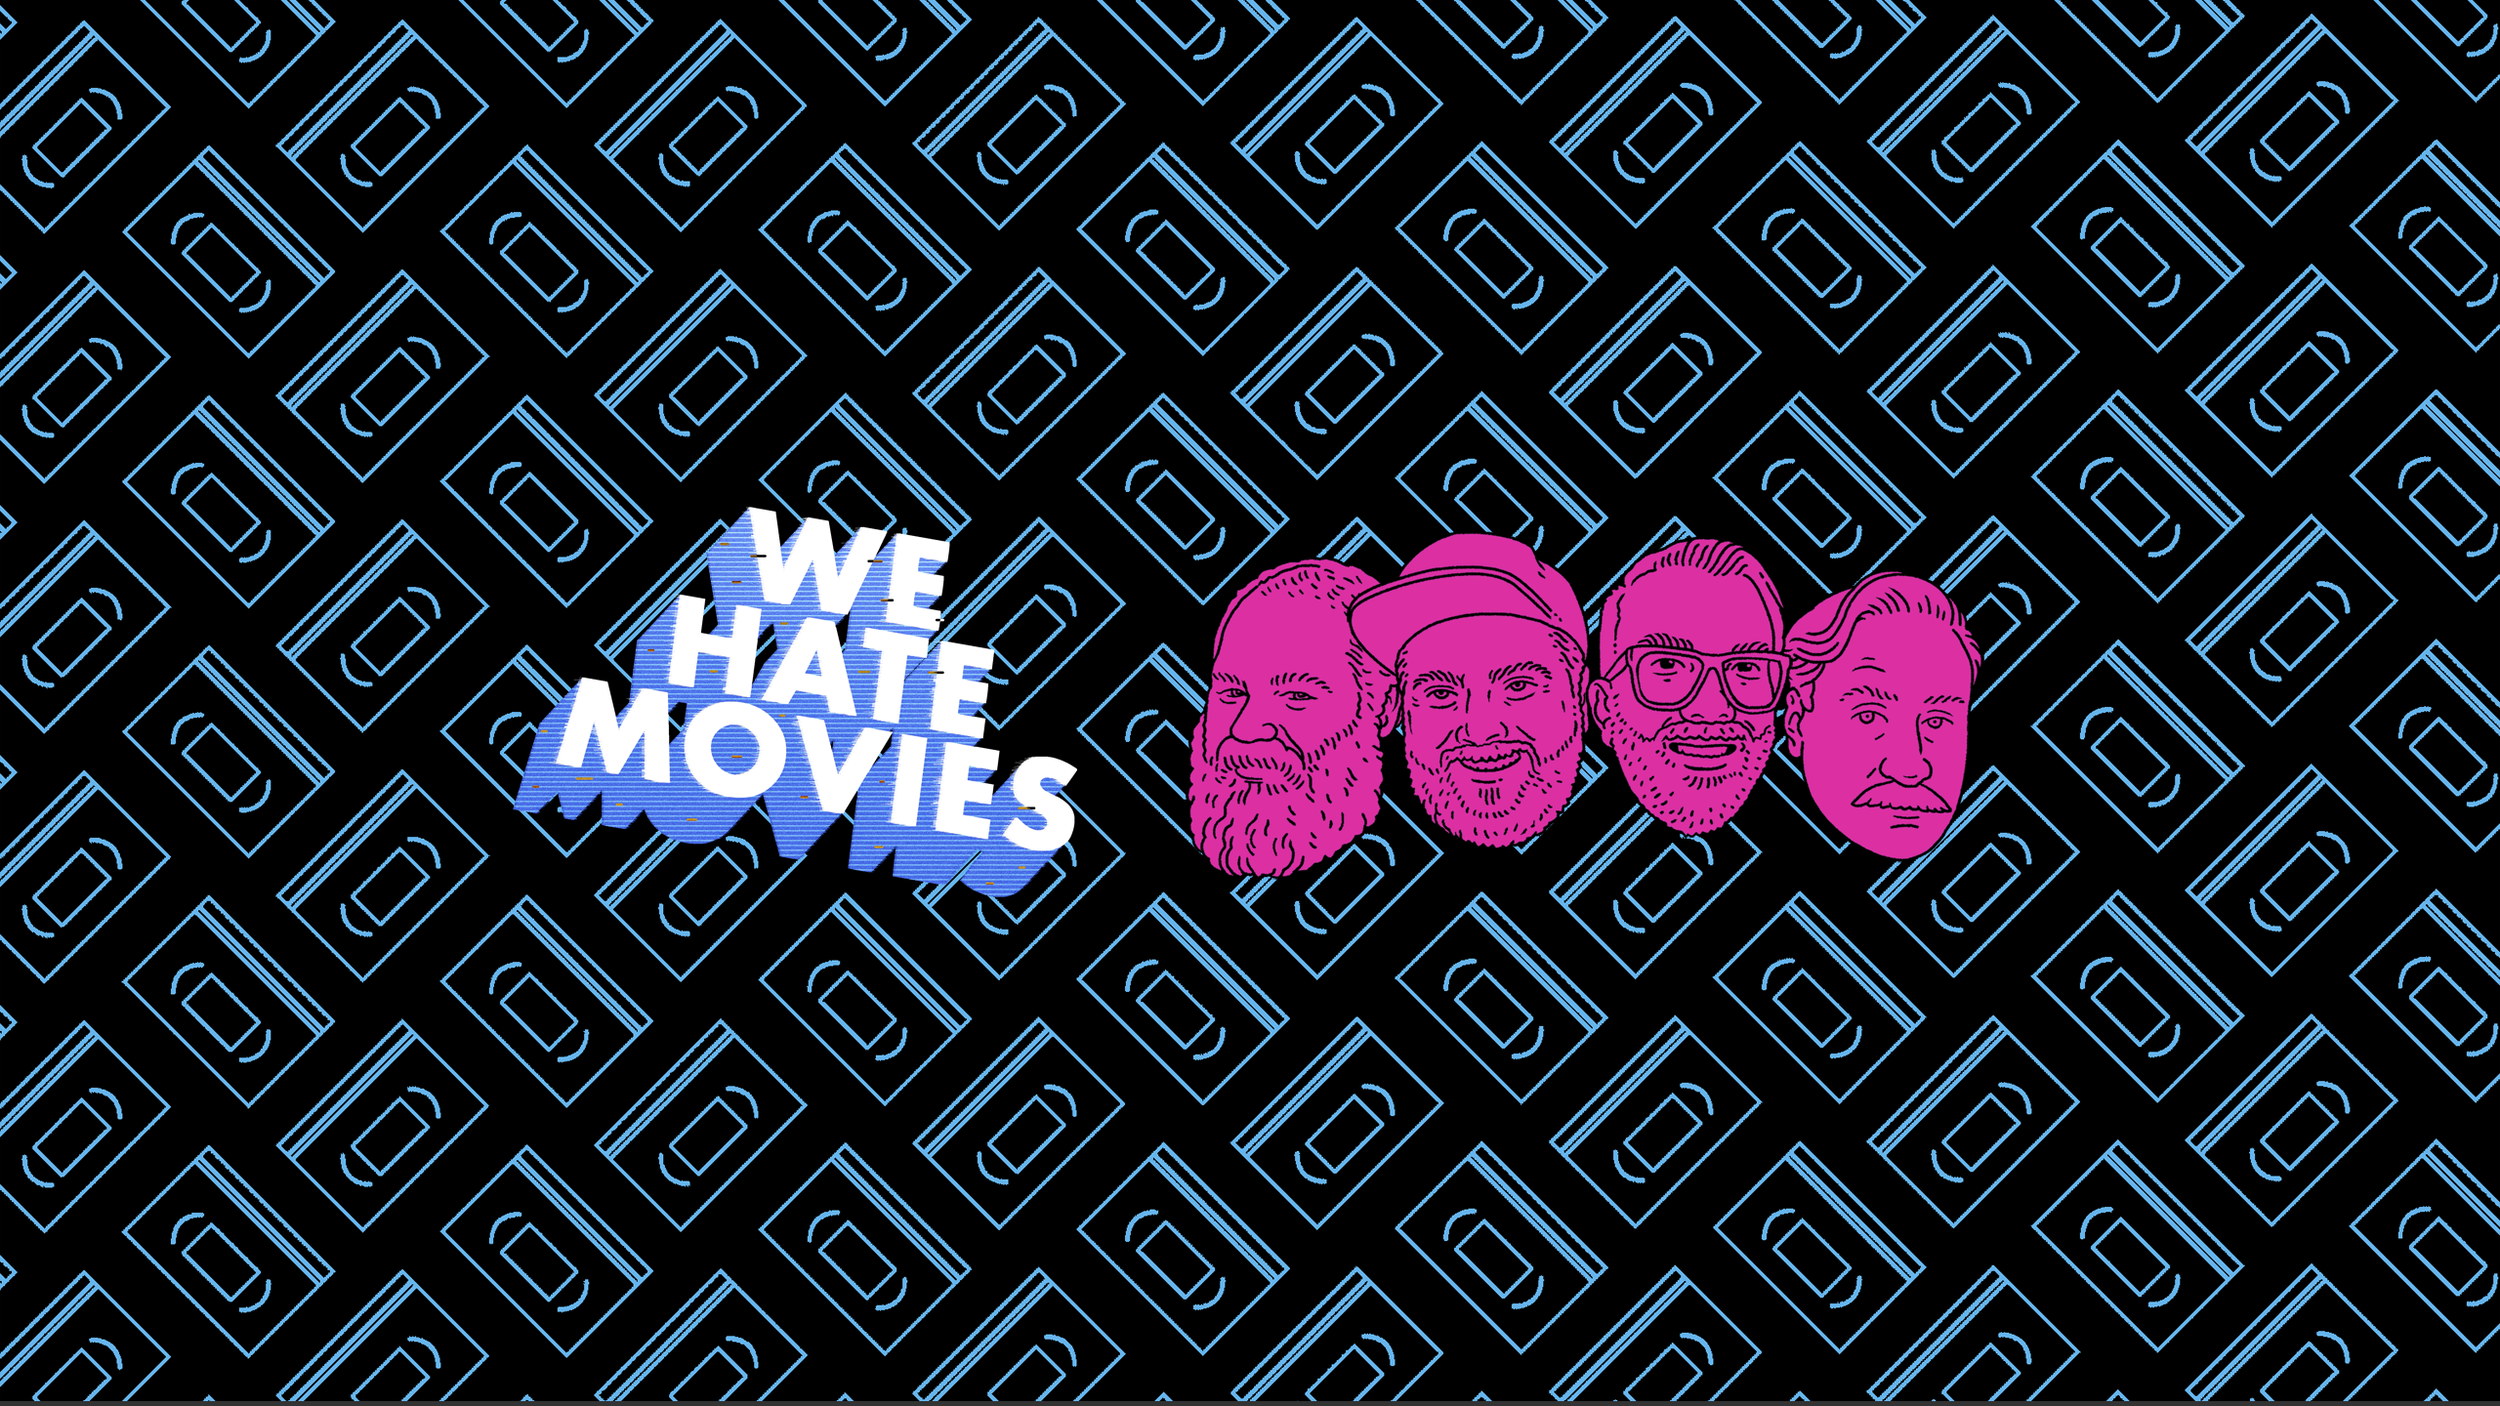 We Hate Movies banner with the faces of all four hosts drawn in neon pink against a background of repeating light blue VHS tapes.